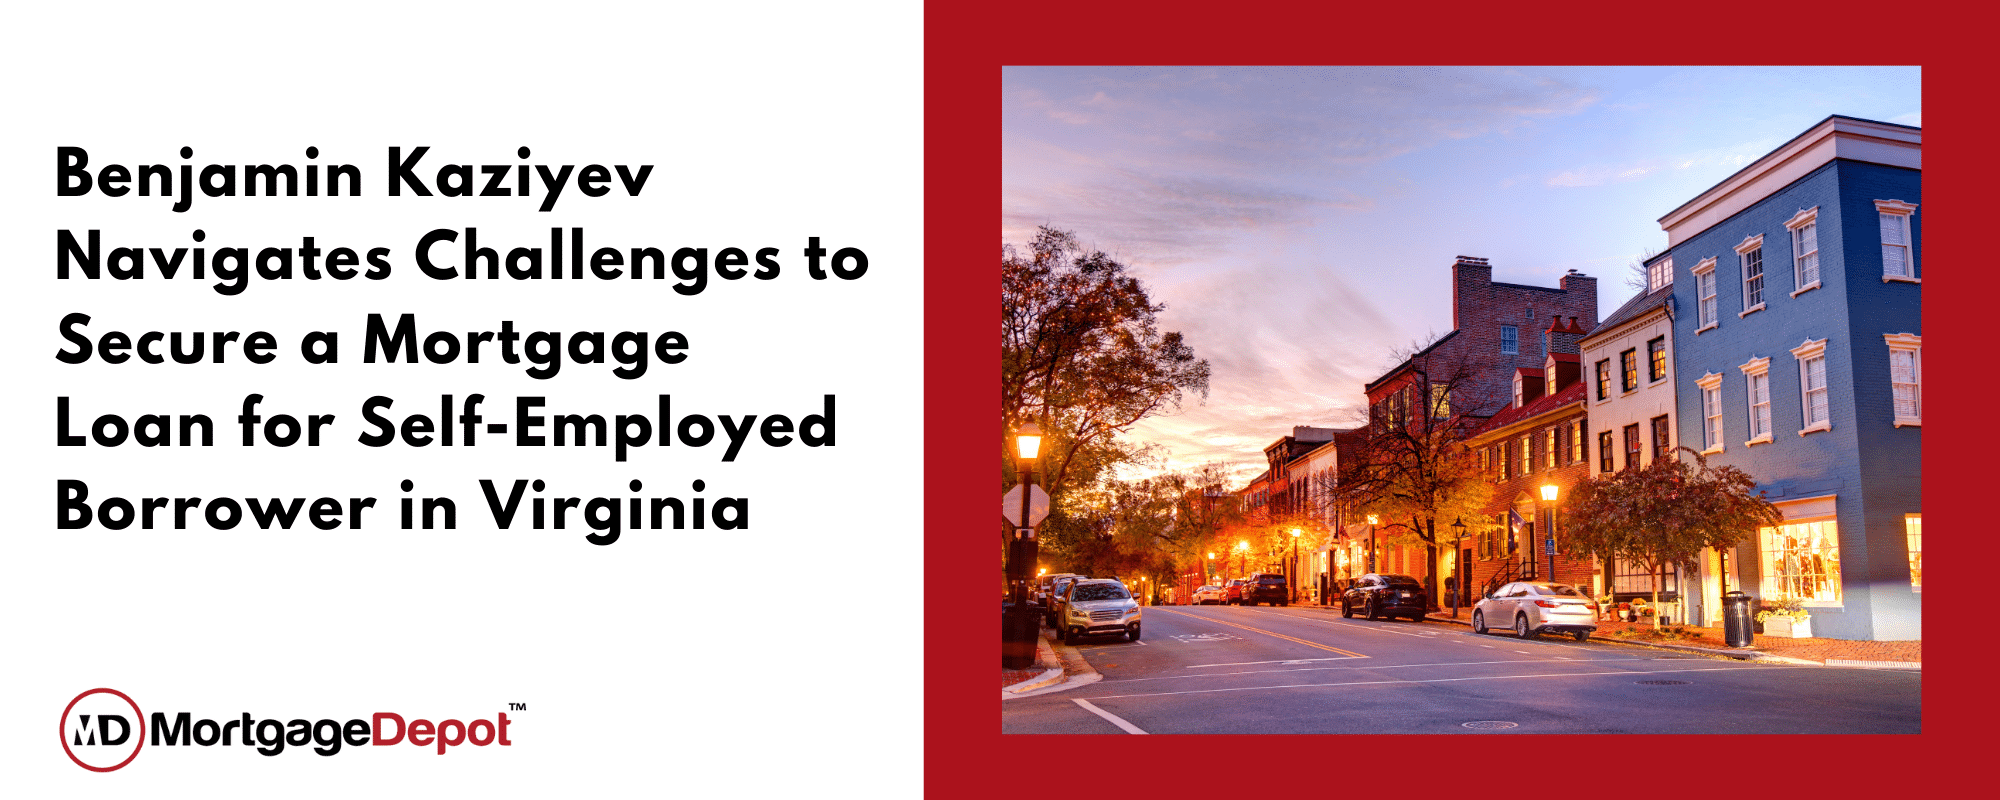 Benjamin Kaziyev Navigates Challenges To Safe A Mortgage Mortgage For Self-Employed Borrower In Virginia